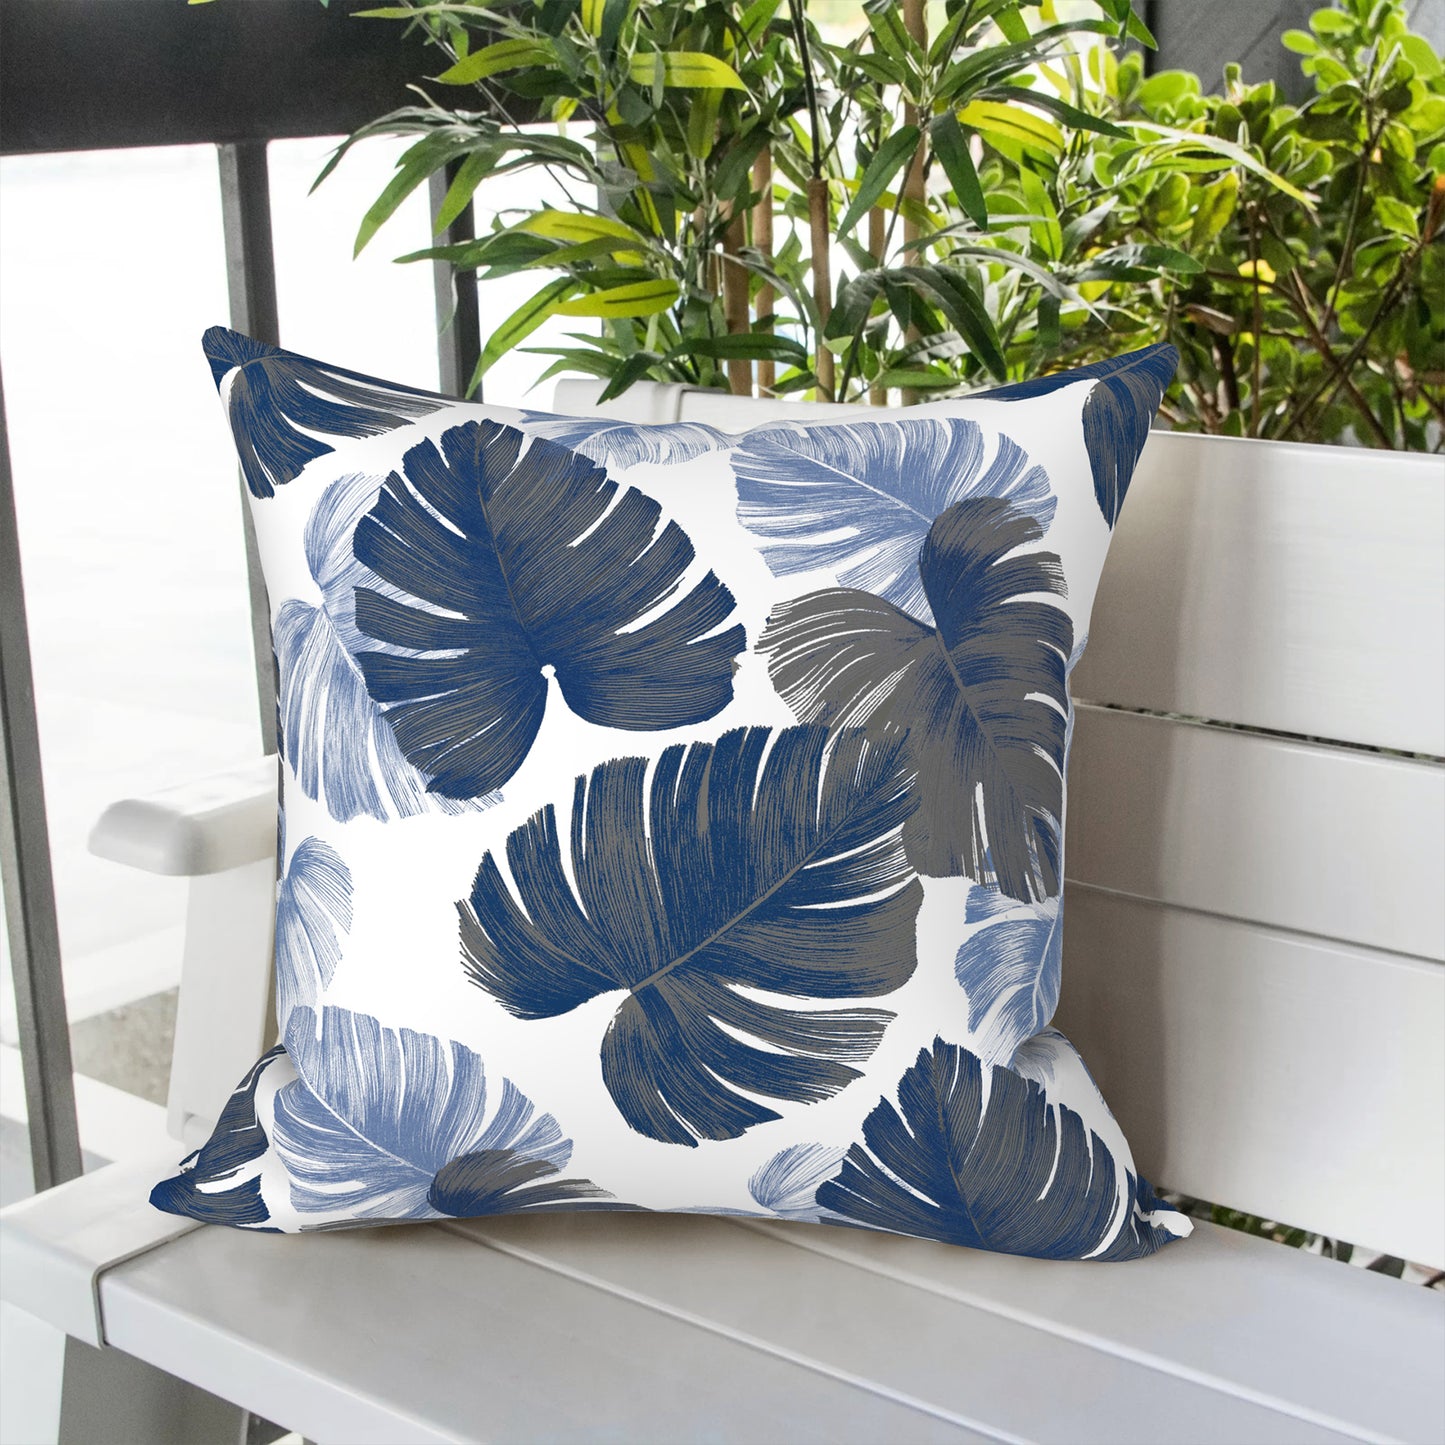 Melody Elephant Outdoor Throw Pillow Covers Pack of 2, Decorative Water Repellent Square Pillow Cases 18x18 Inch, Patio Pillowcases for Home Patio Furniture Use, Monstera Blue